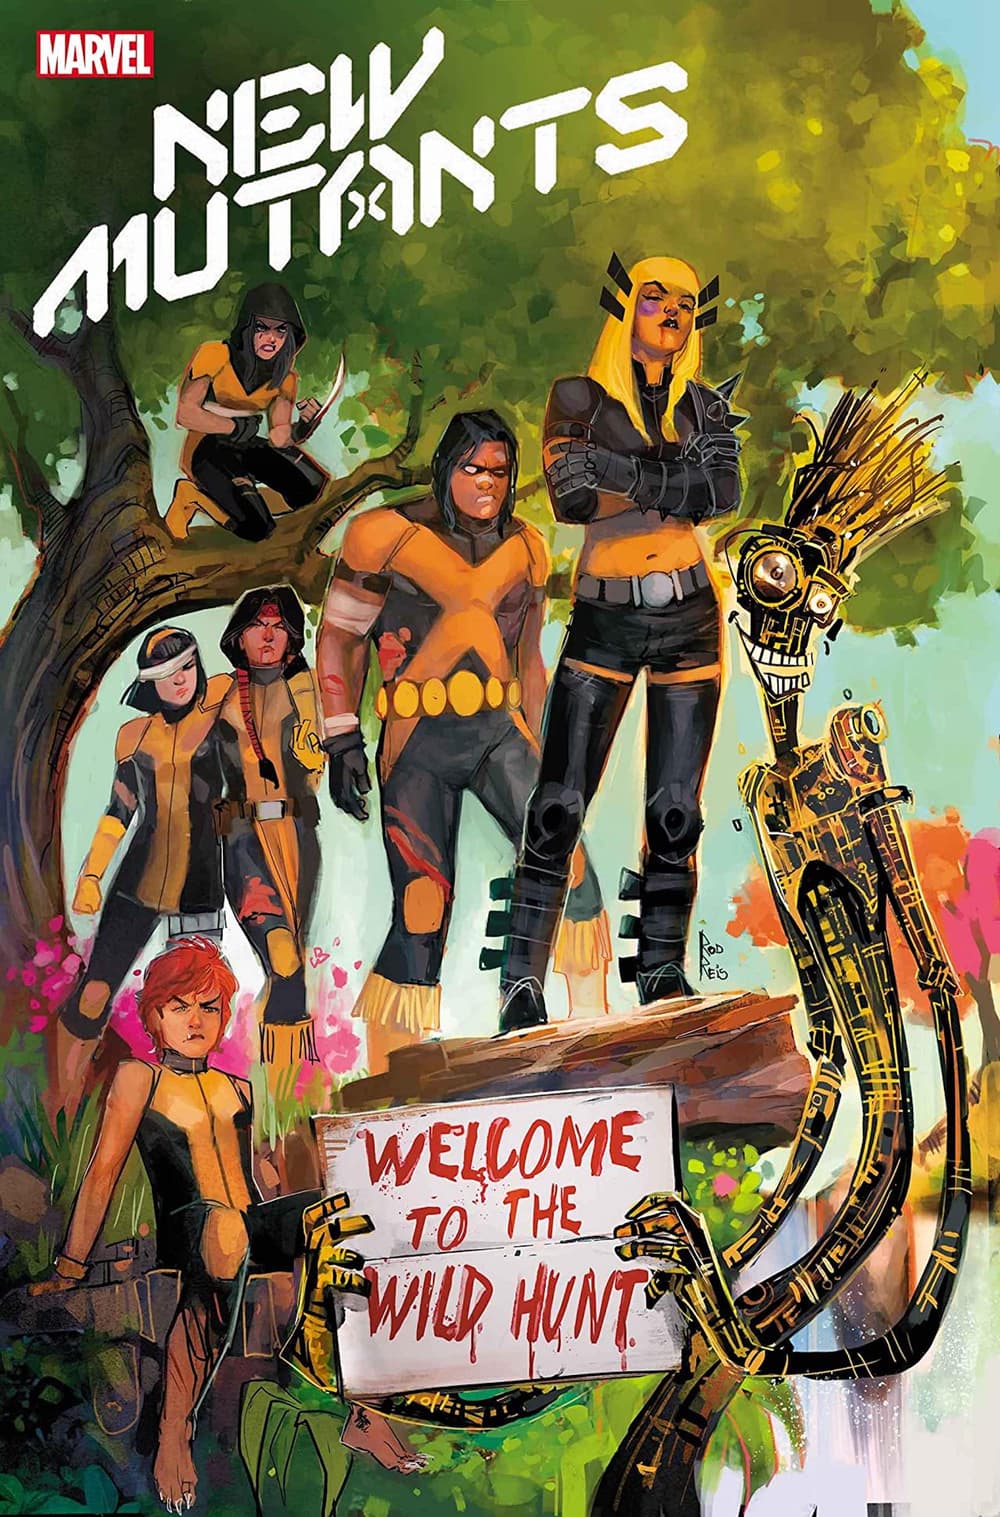 NEW MUTANTS #14 cover by Rod Reis